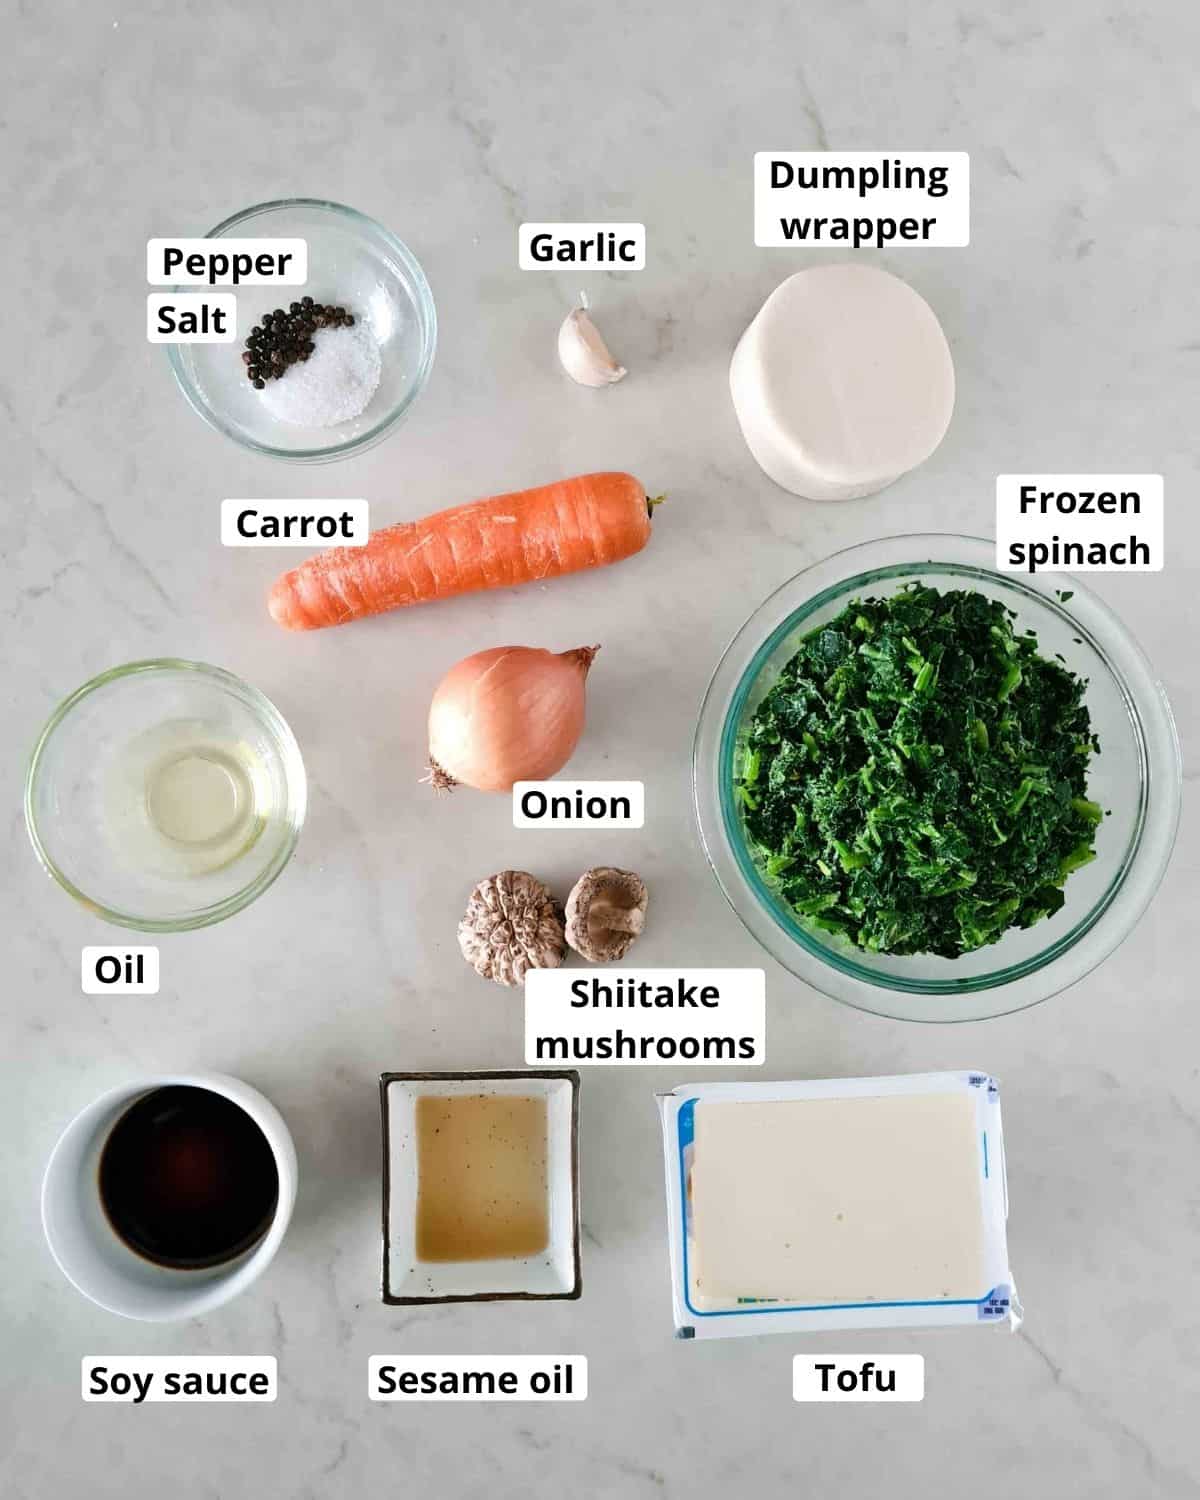 All the ingredients required to make this recipe, labeled